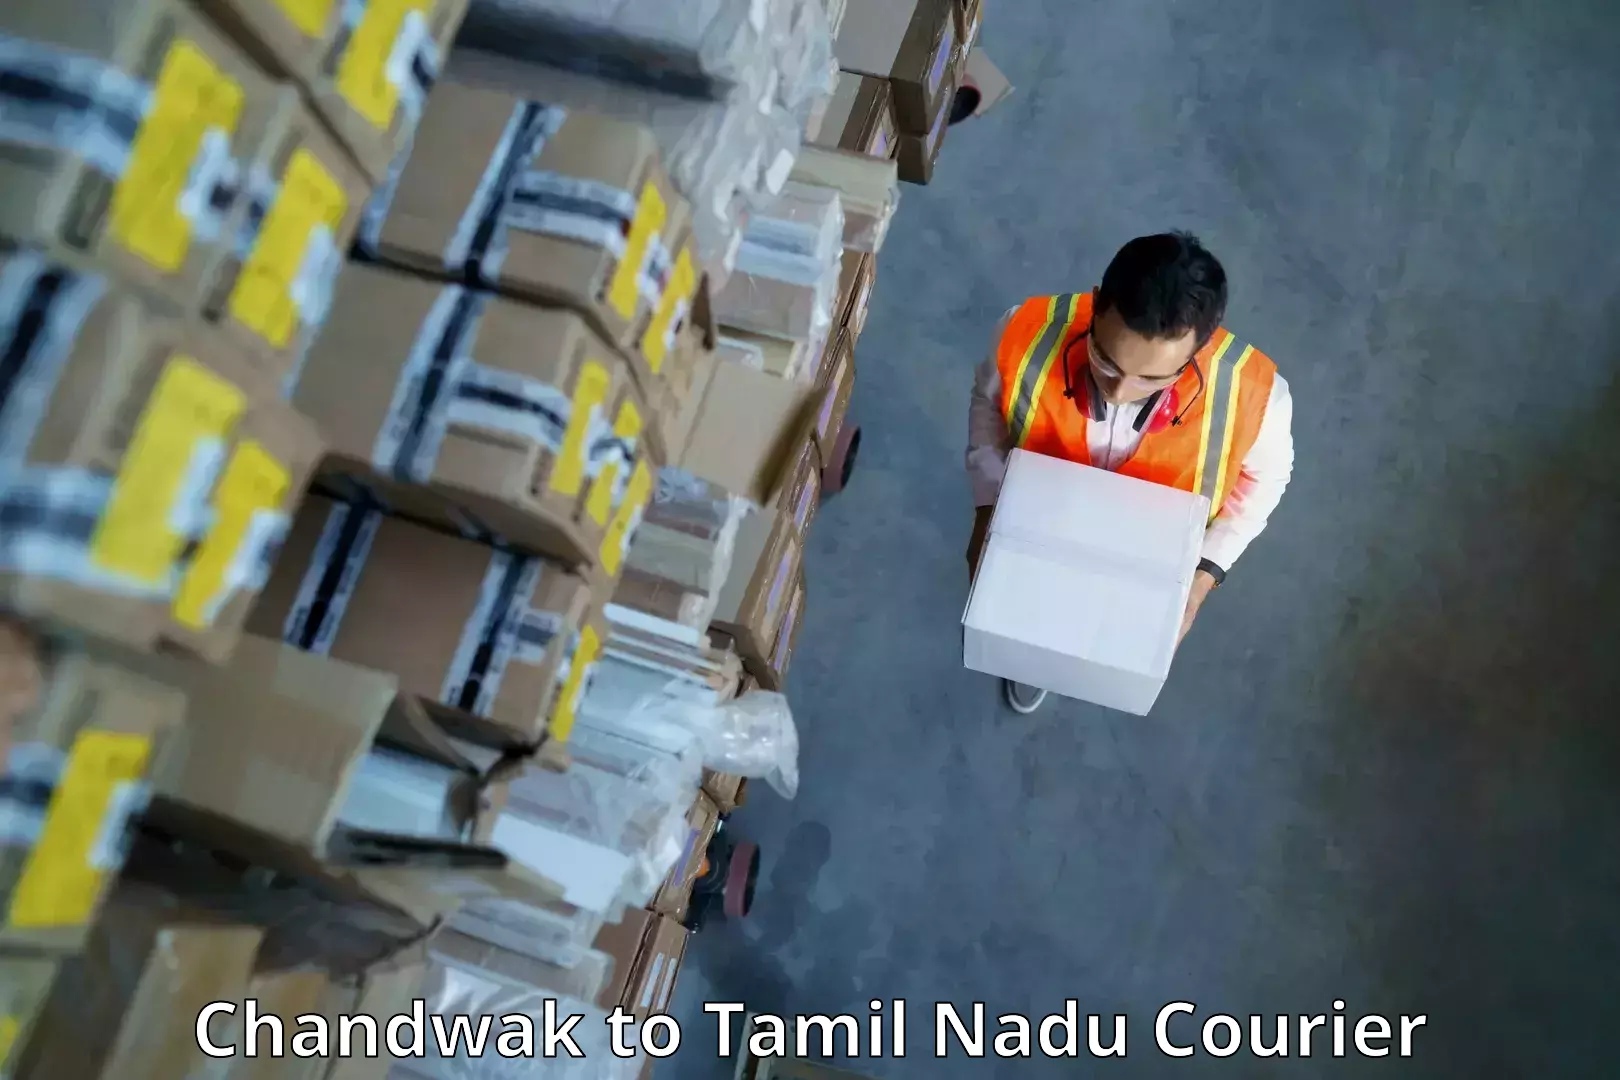 Bulk shipping discounts Chandwak to Vellore Institute of Technology